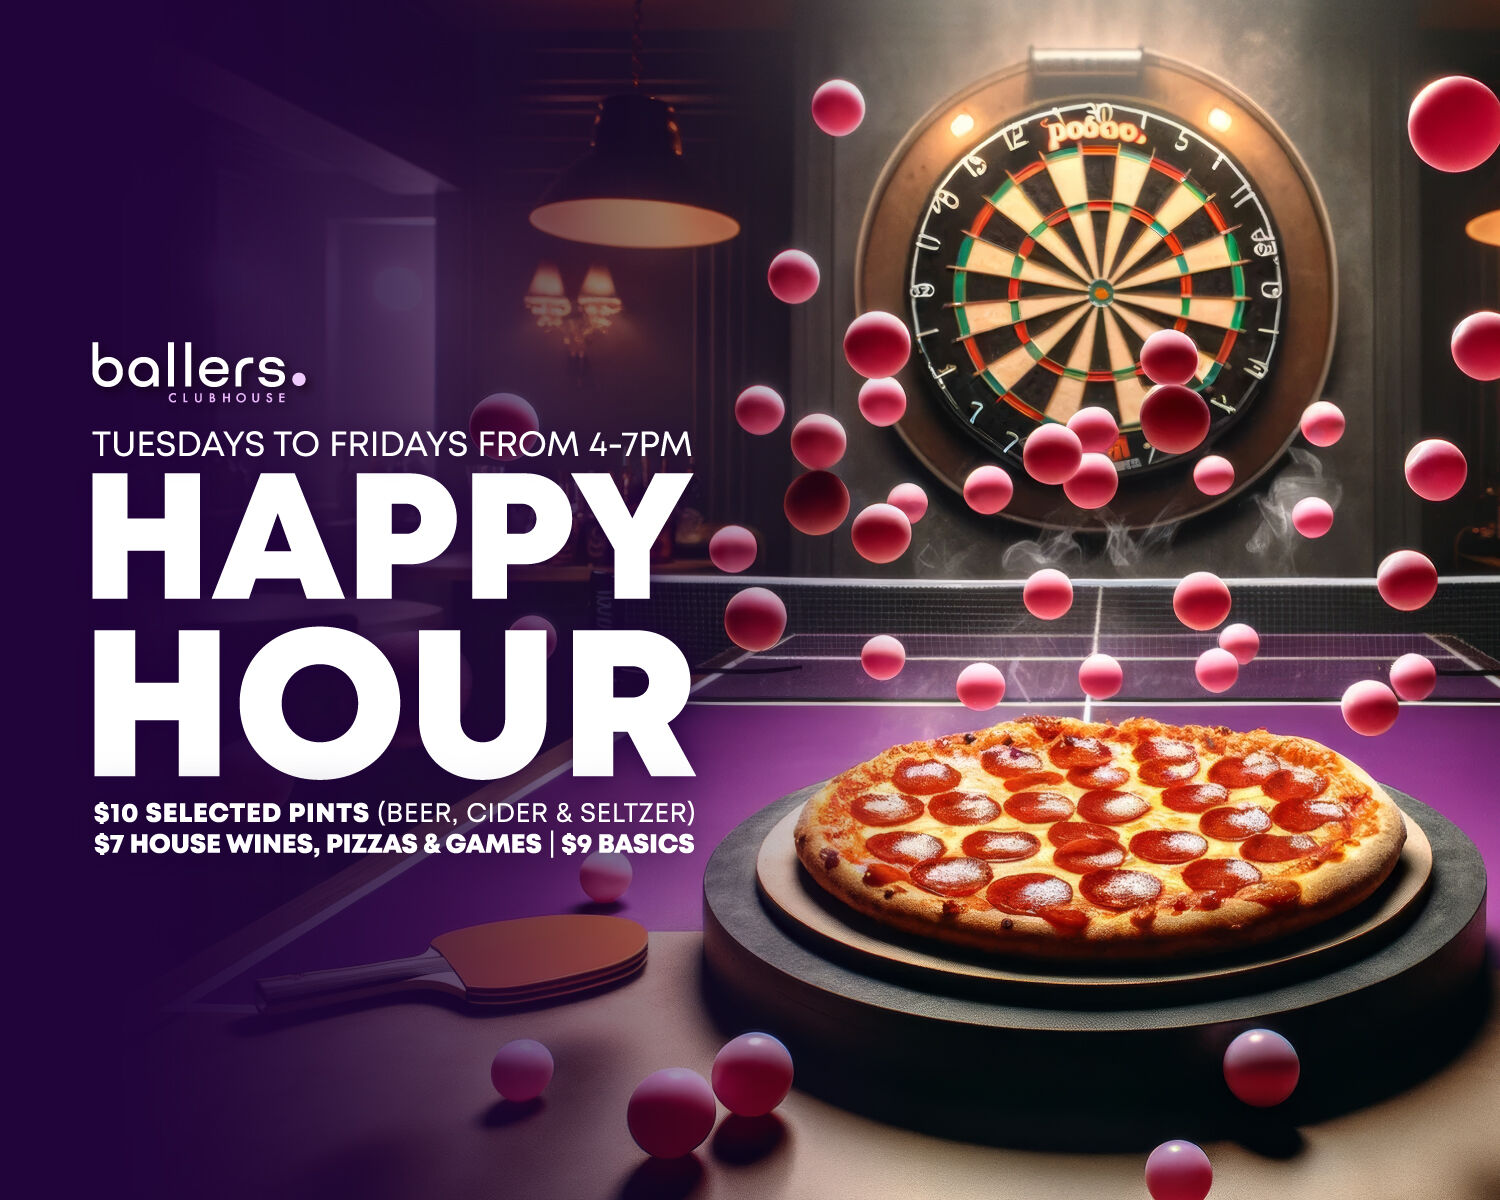 HAPPY HOUR | $7 HOUSE WINES, PIZZAS & GAMES + $9 BASICS + $10 PINTS | BALLERS CARLTON